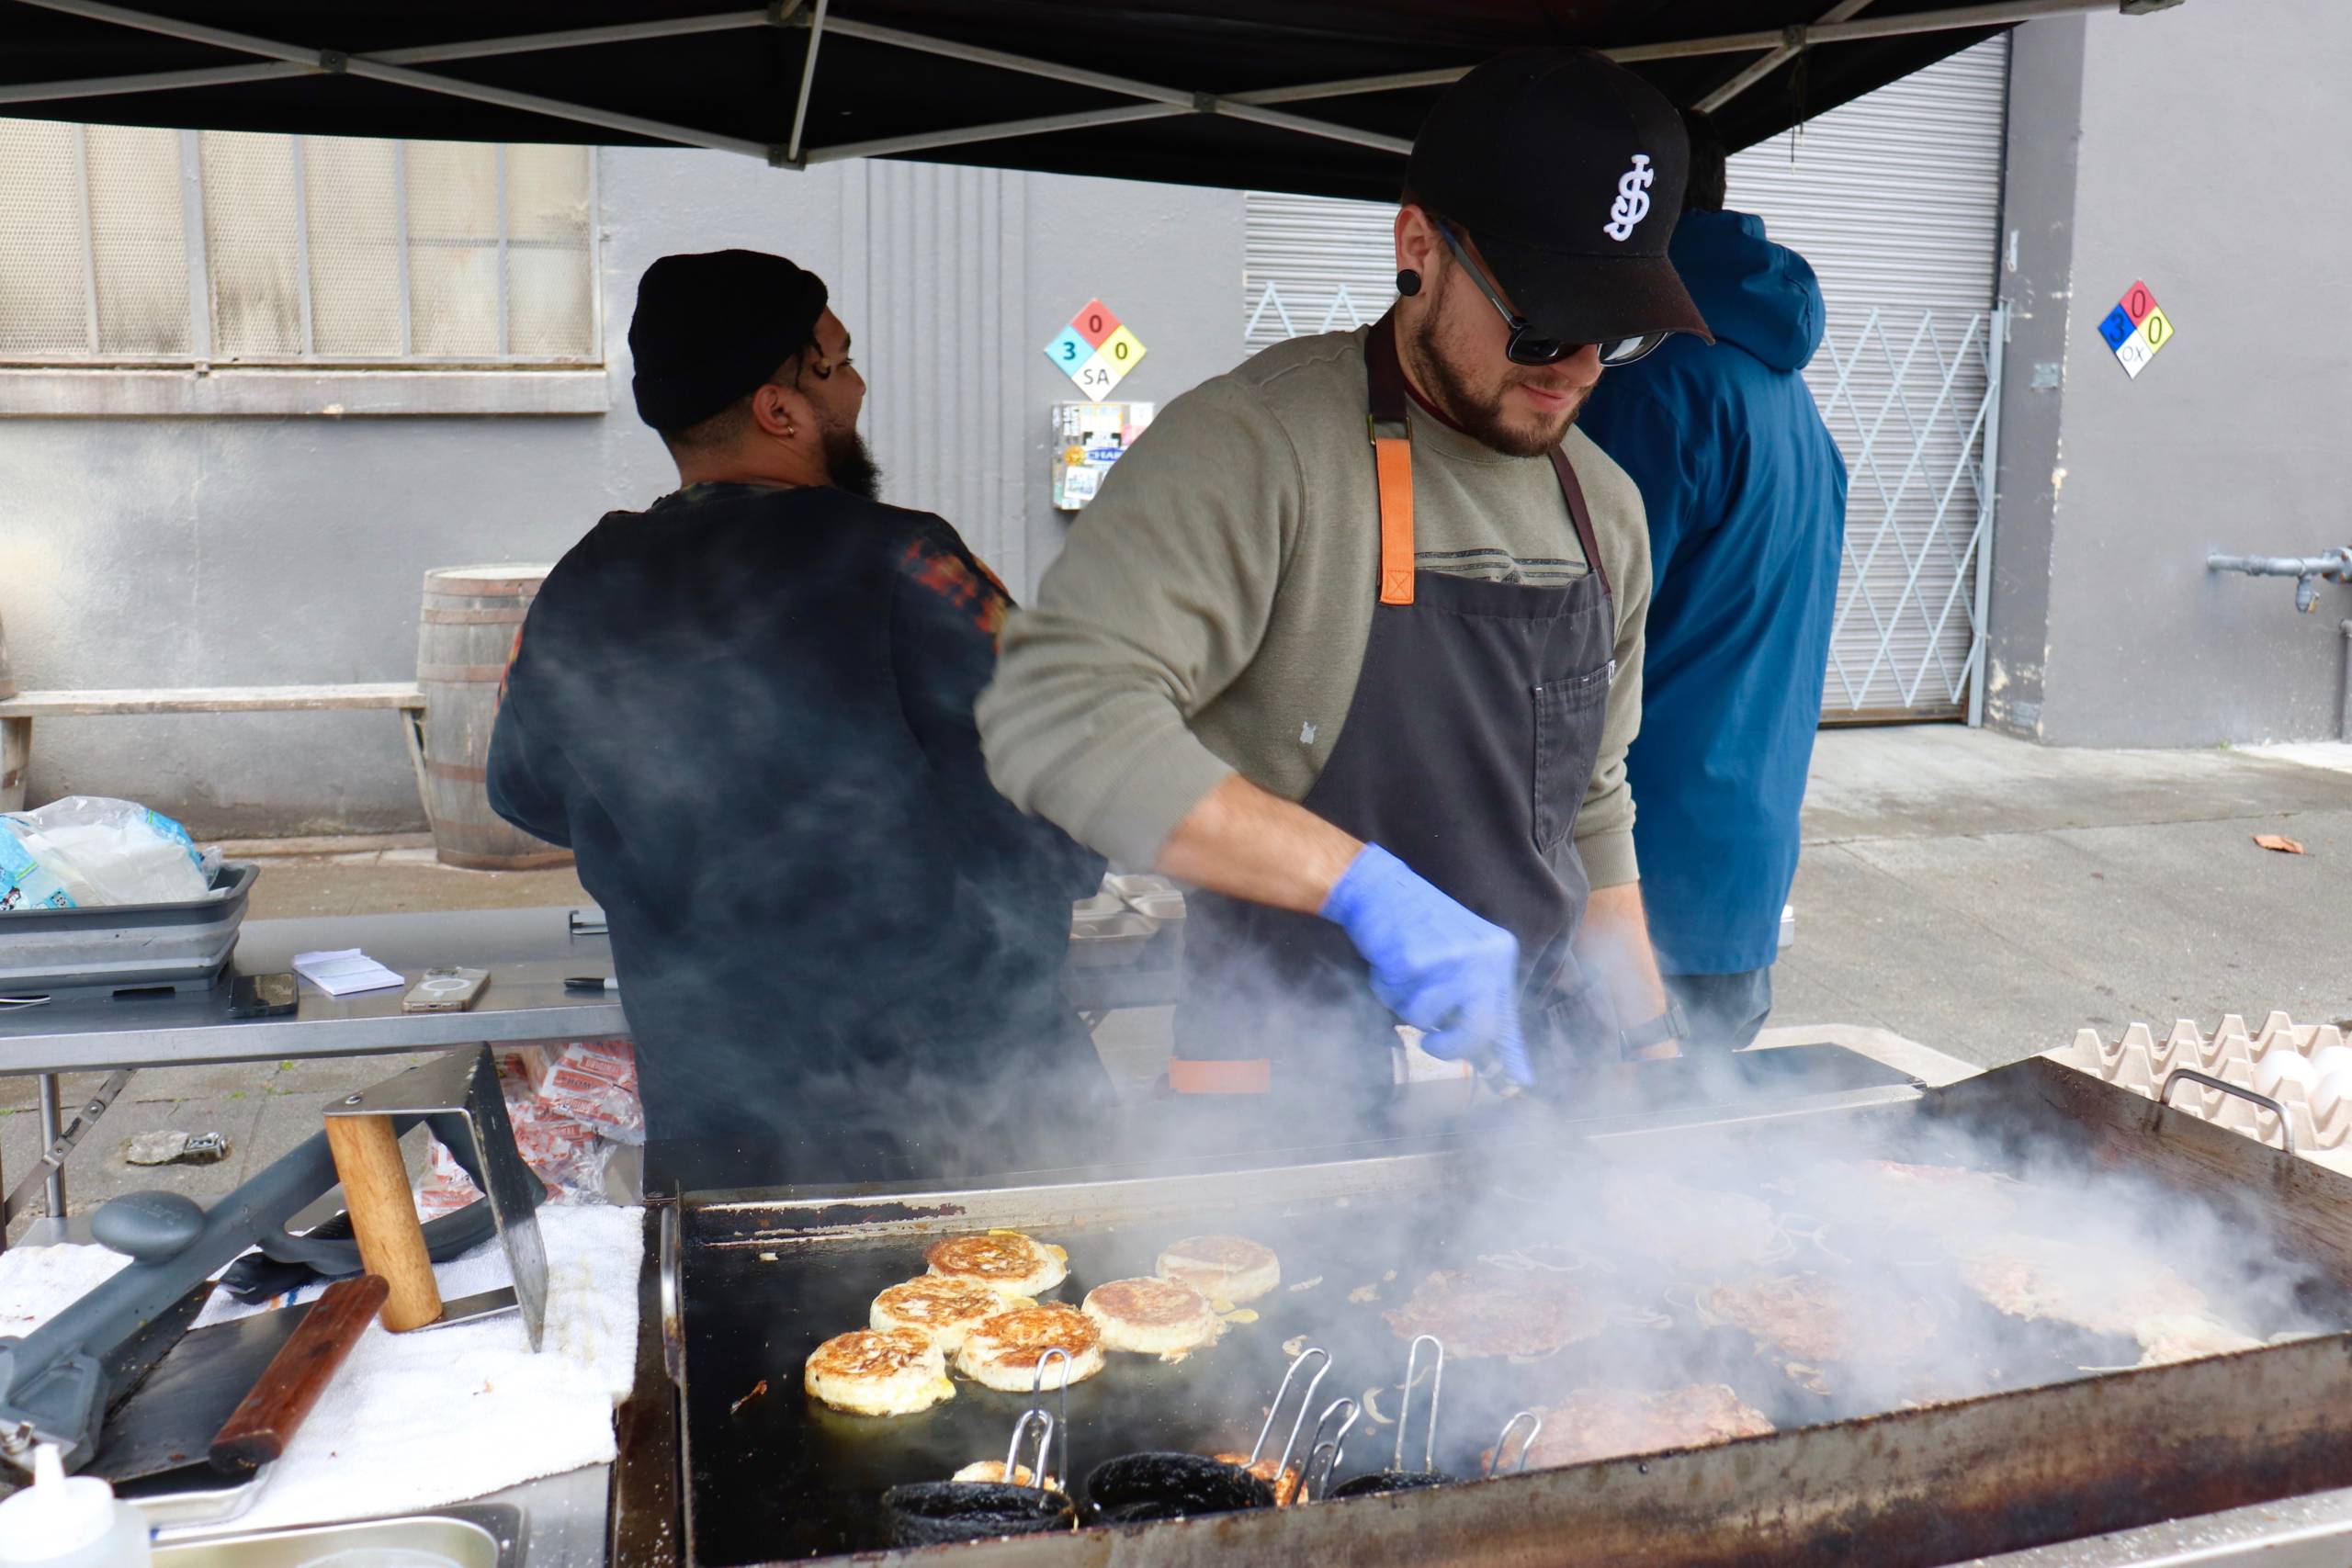 three food workers prepare food and man an outdoor pop-up business in West Oakland